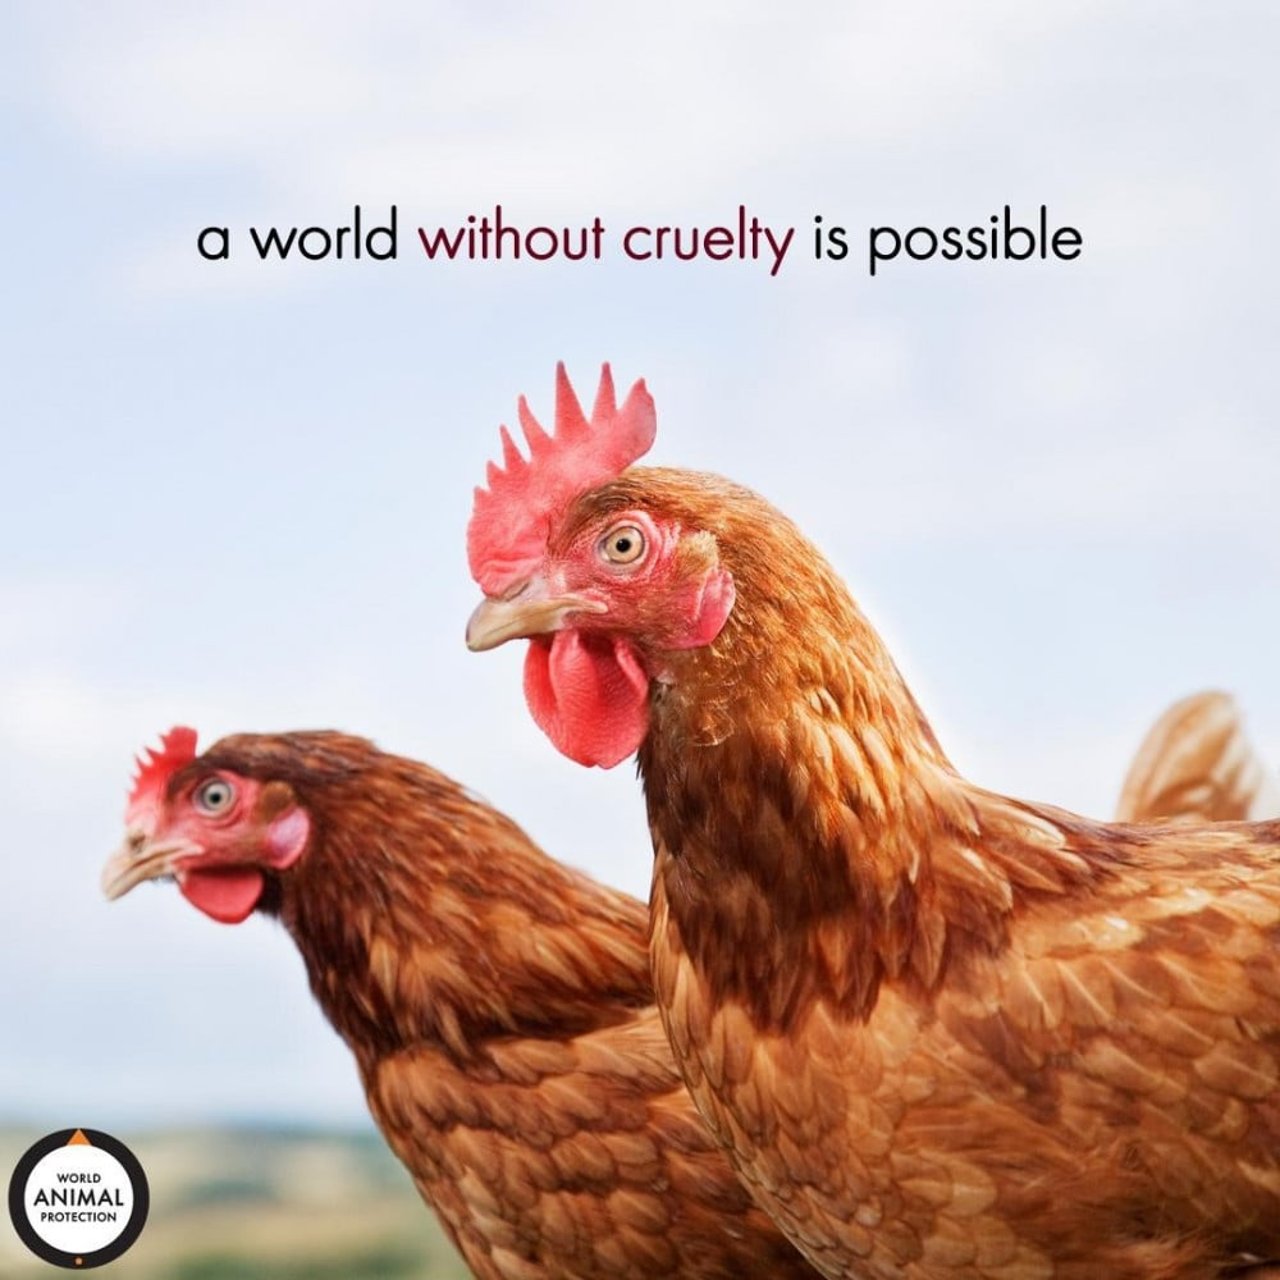 International day for the animals of torture, International day for the victims of torture, chicken abuse